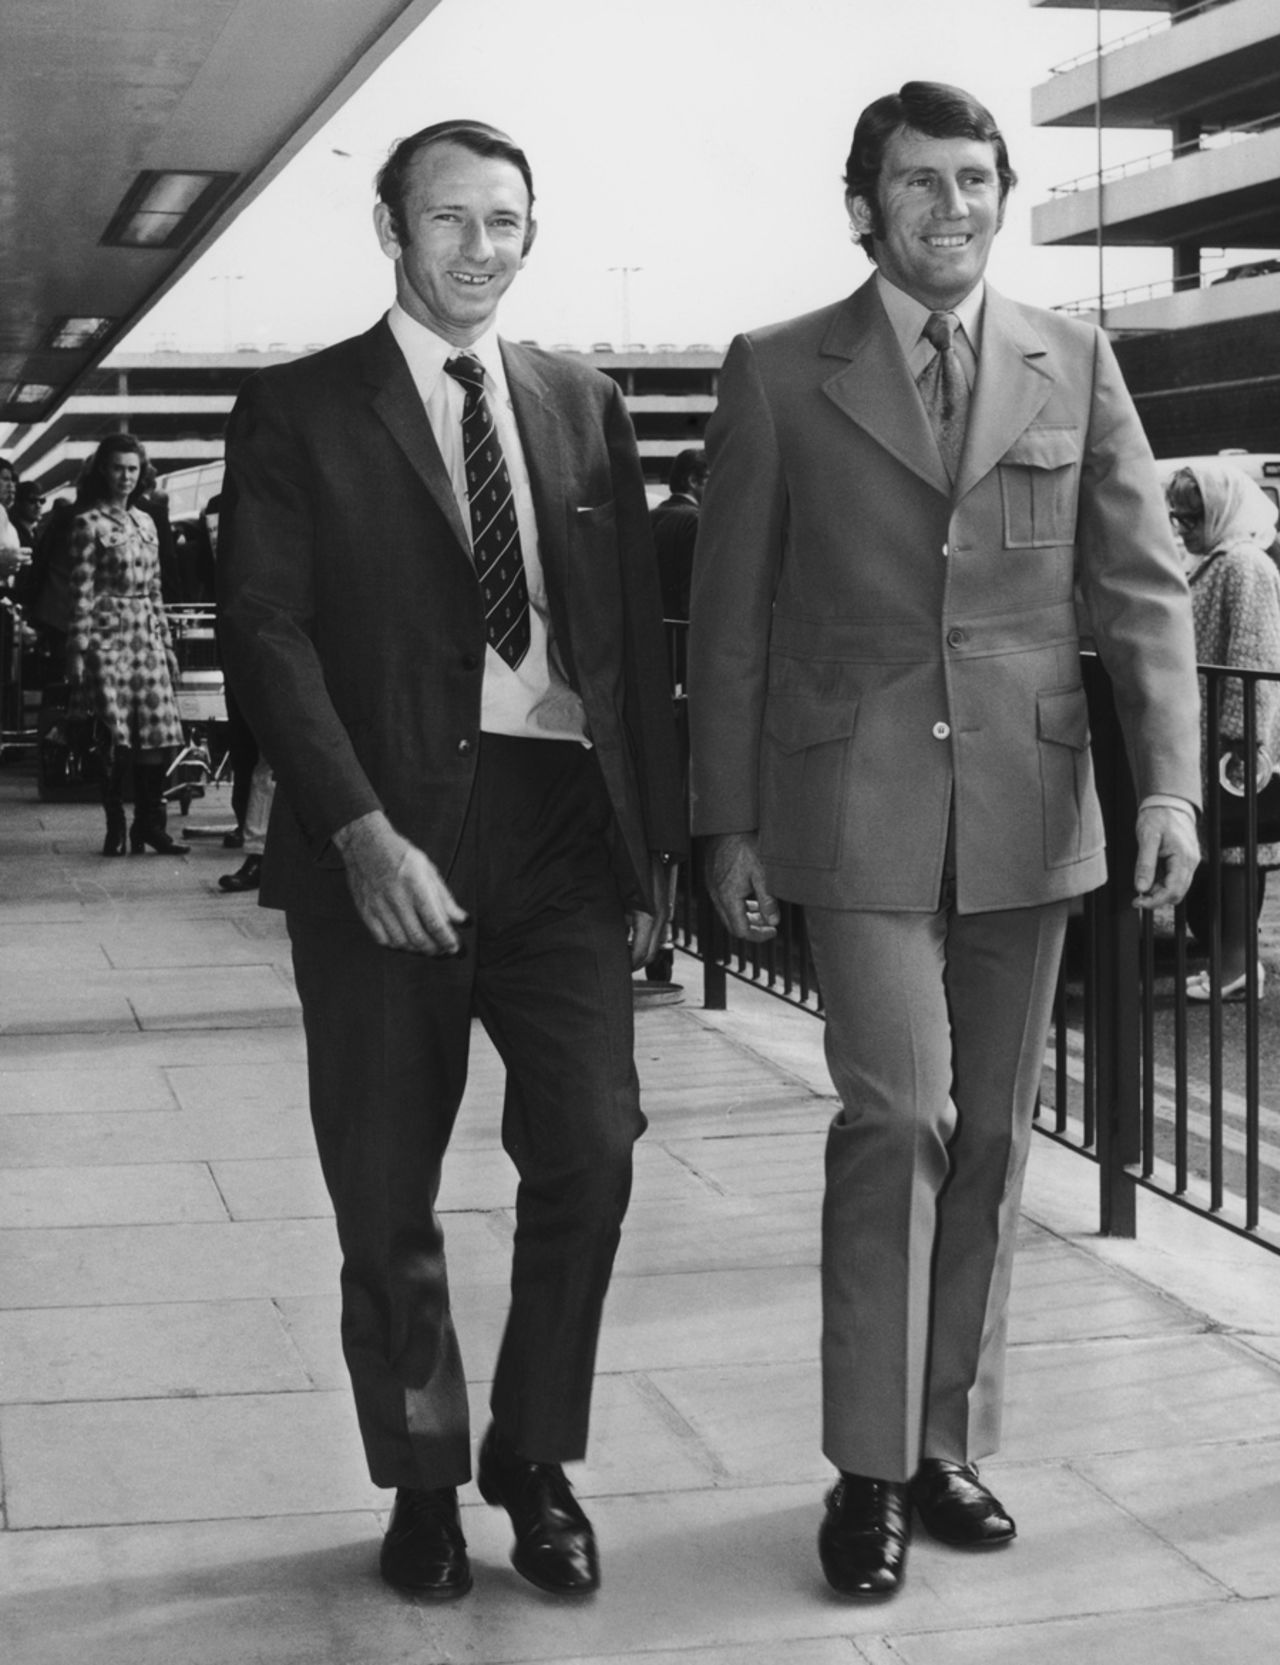 Doug Walters and Ian Chappell arrive at London airport from West Indies, April 18, 1972